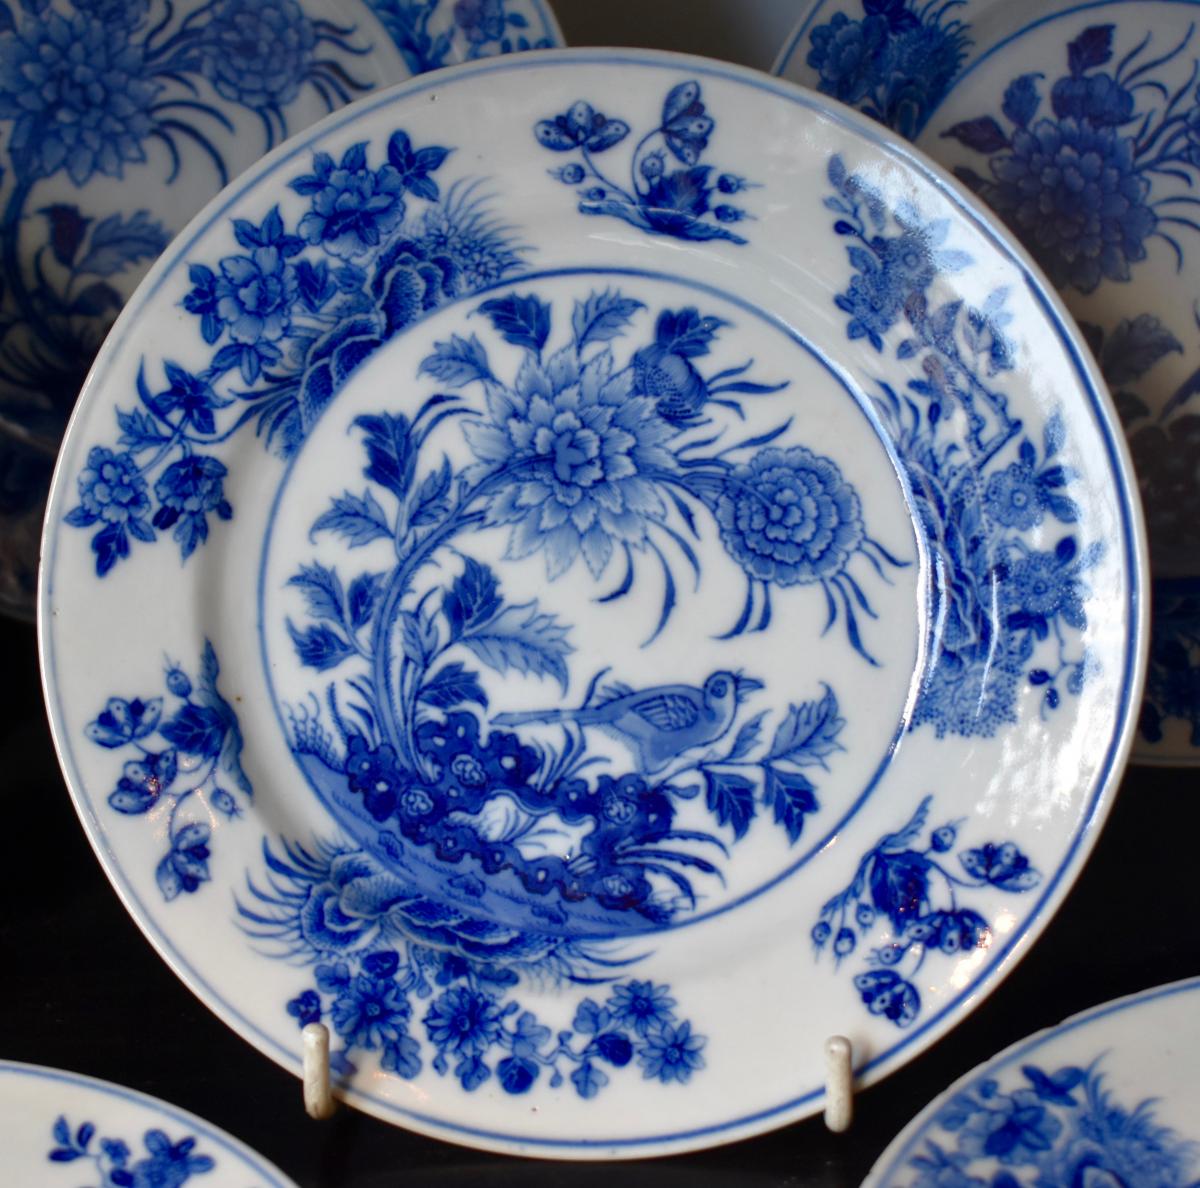 A set of 5 blue and white plates